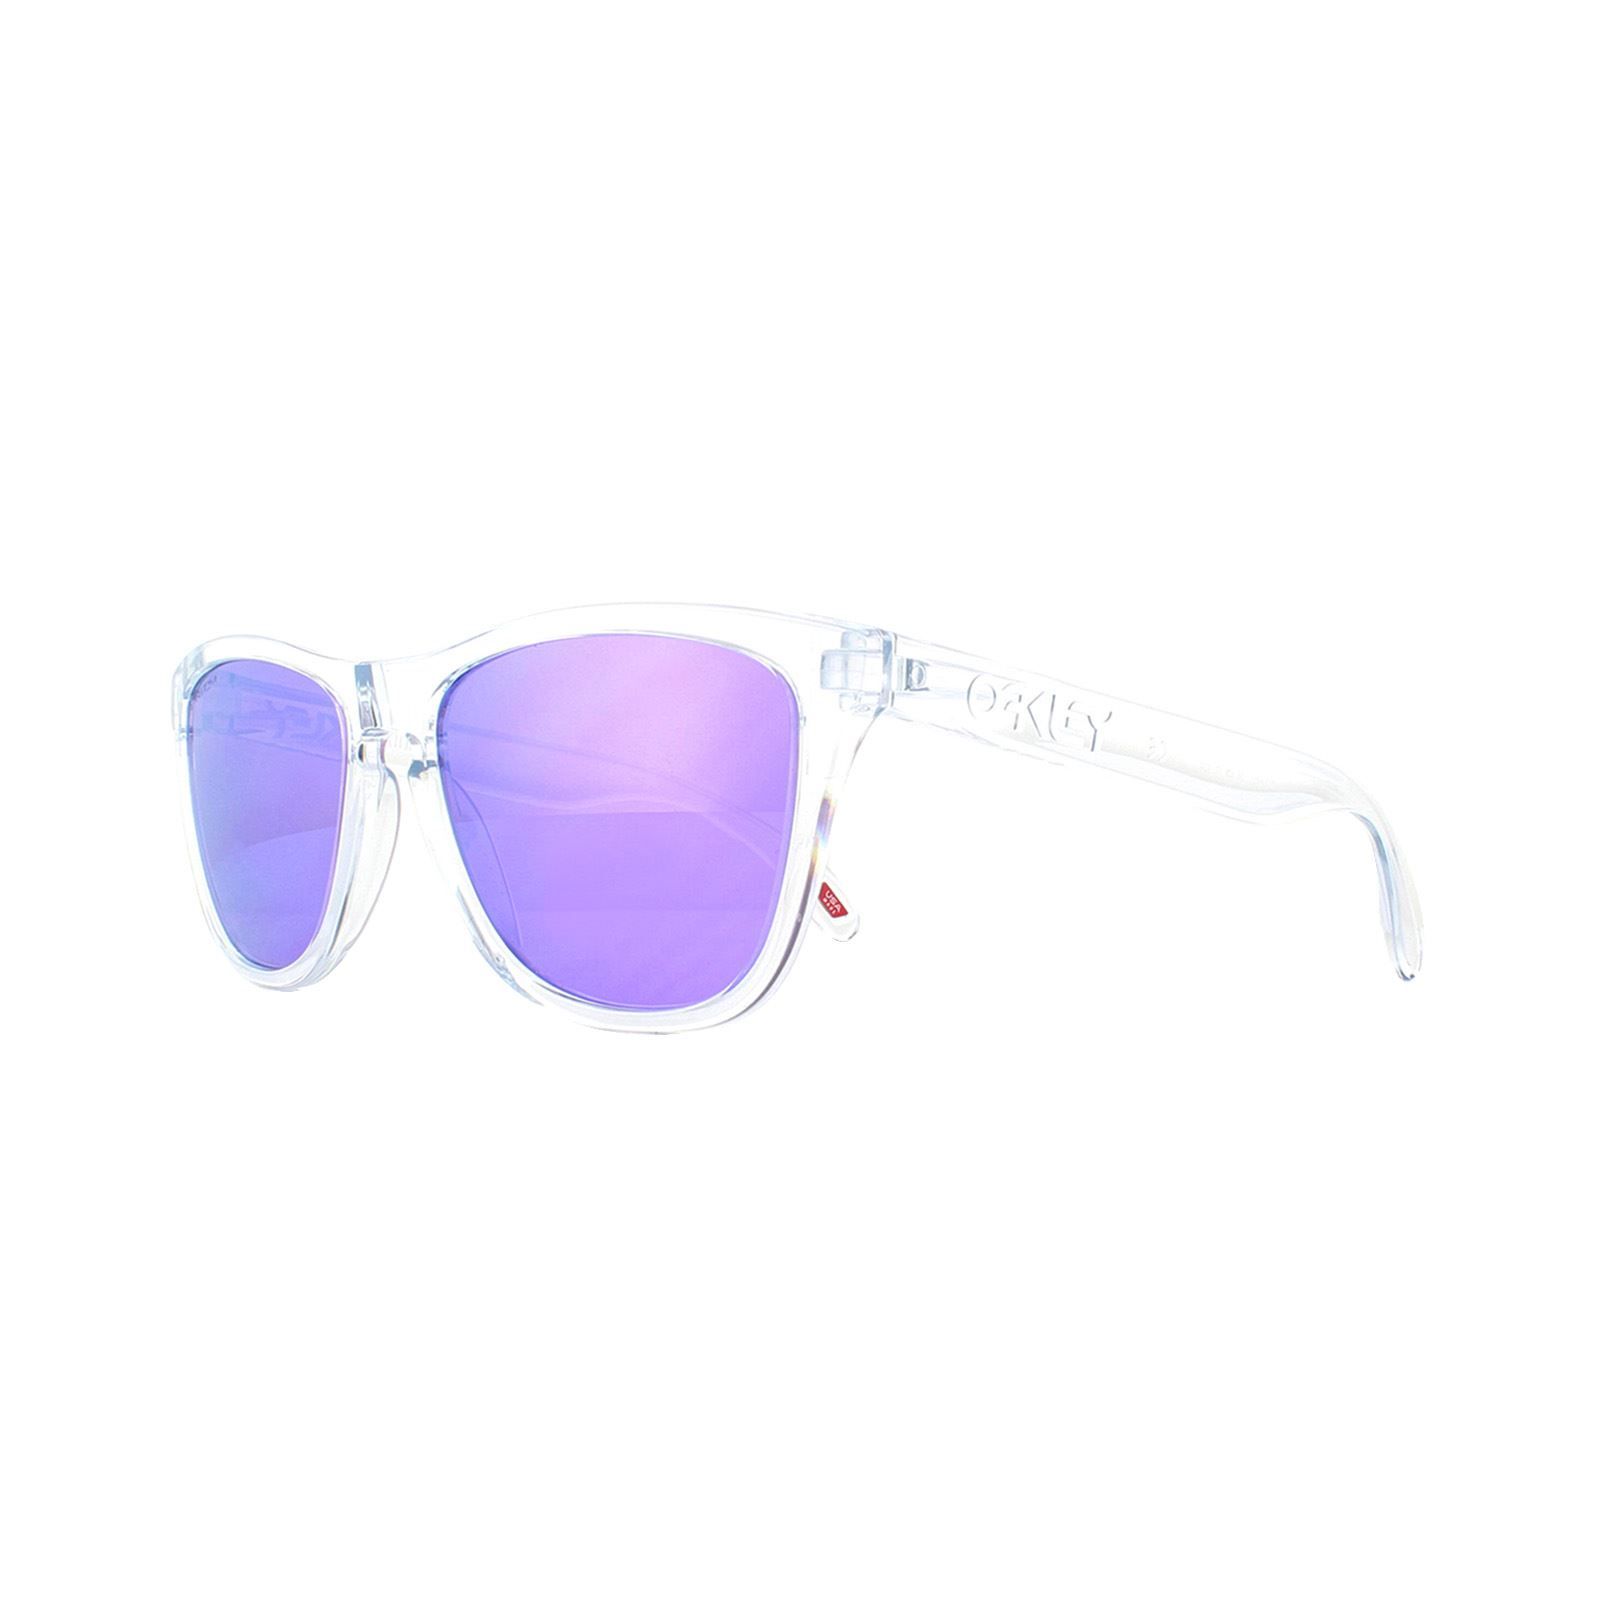 Oakley Sunglasses Frogskins OO9013-H7 Polished Clear Prizm Violet a re-run of the very first Oakley dual-lens sunglass the Frogskins are limited edition specials that are in high demand and often collectors models. Unusual colours and funky combinations make these much sought after.